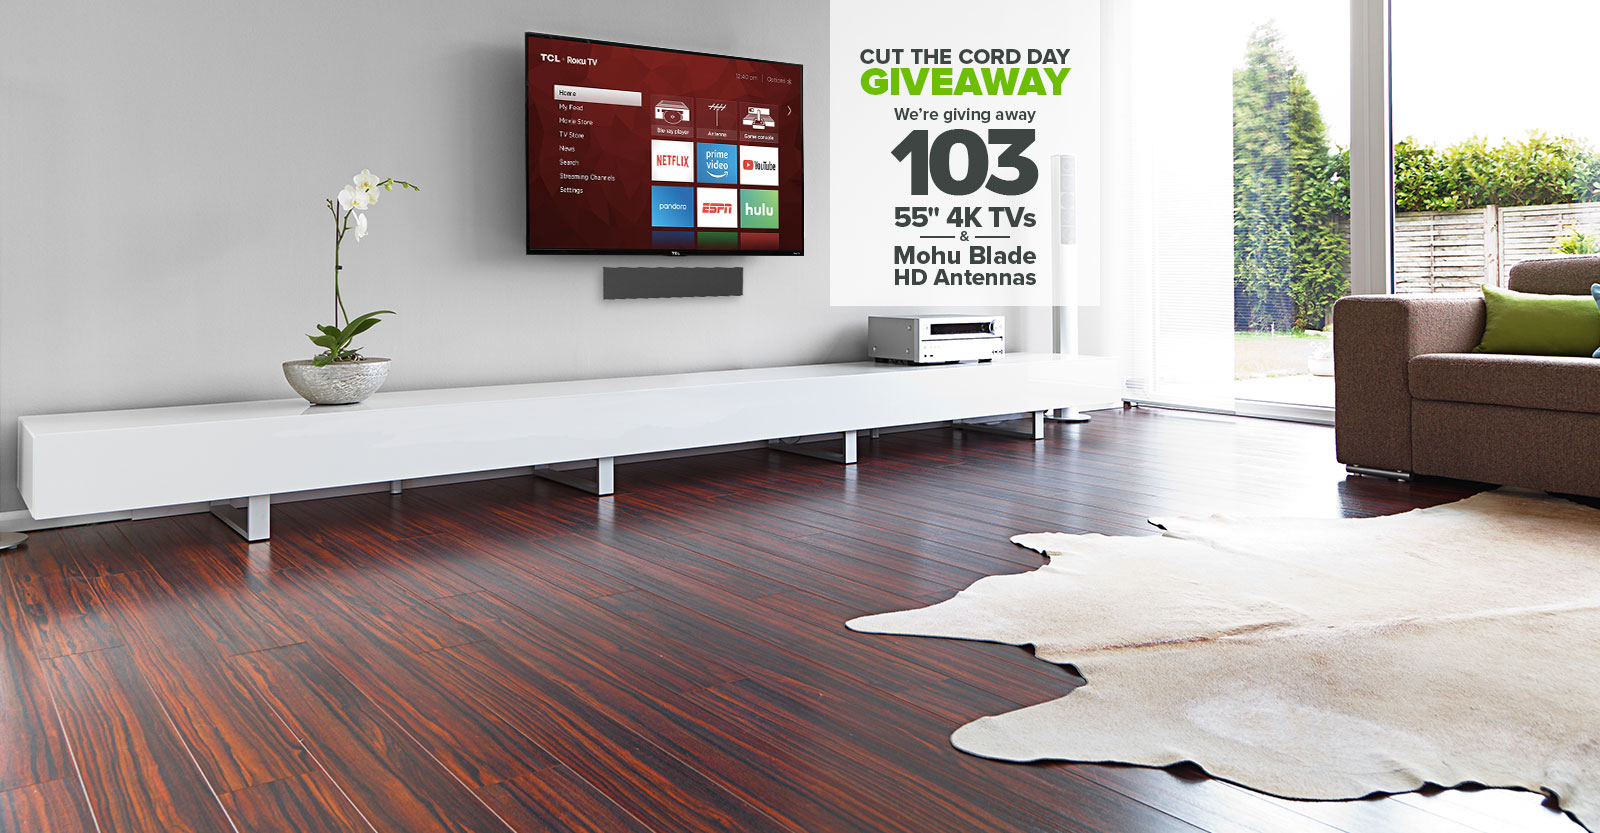 Cut the Cord Day 2018 - Enter to Win a 55" TV and Mohu Blade Antenna!